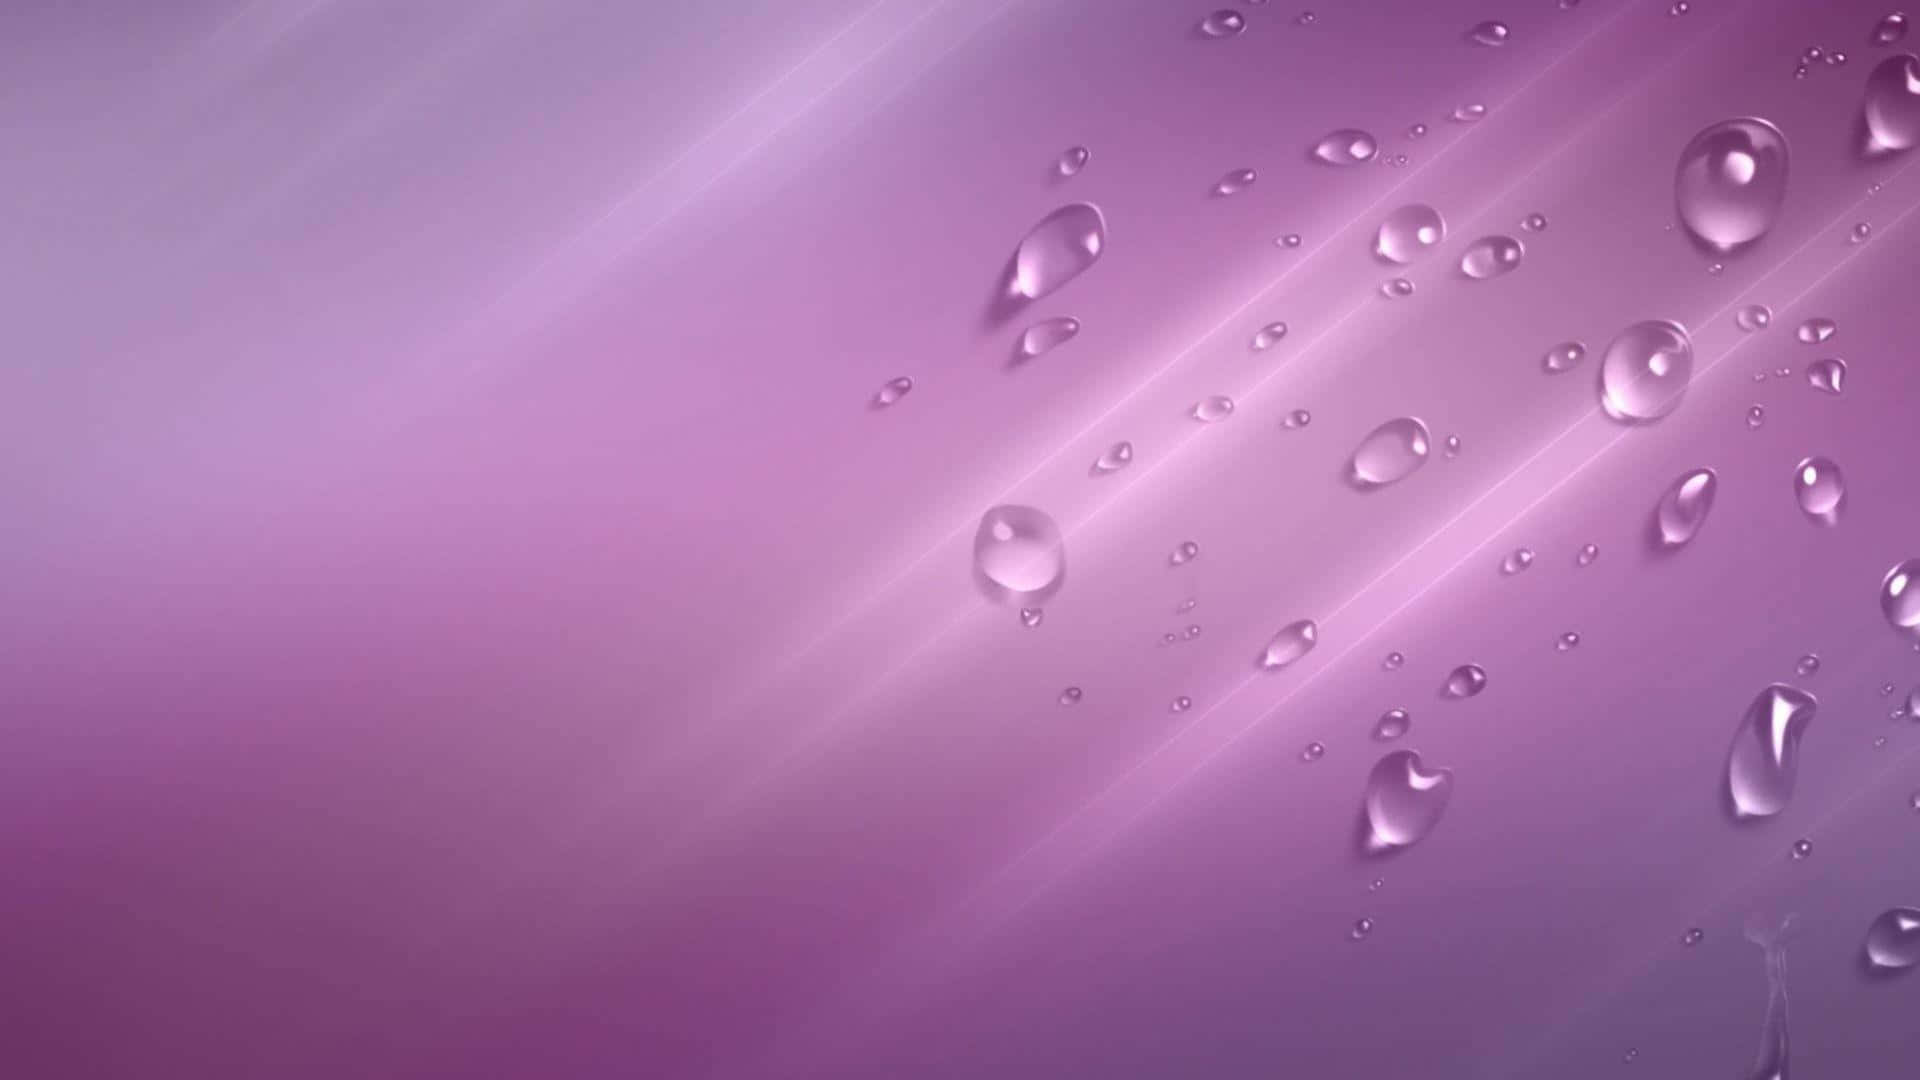 A Vibrant Solid Purple Background